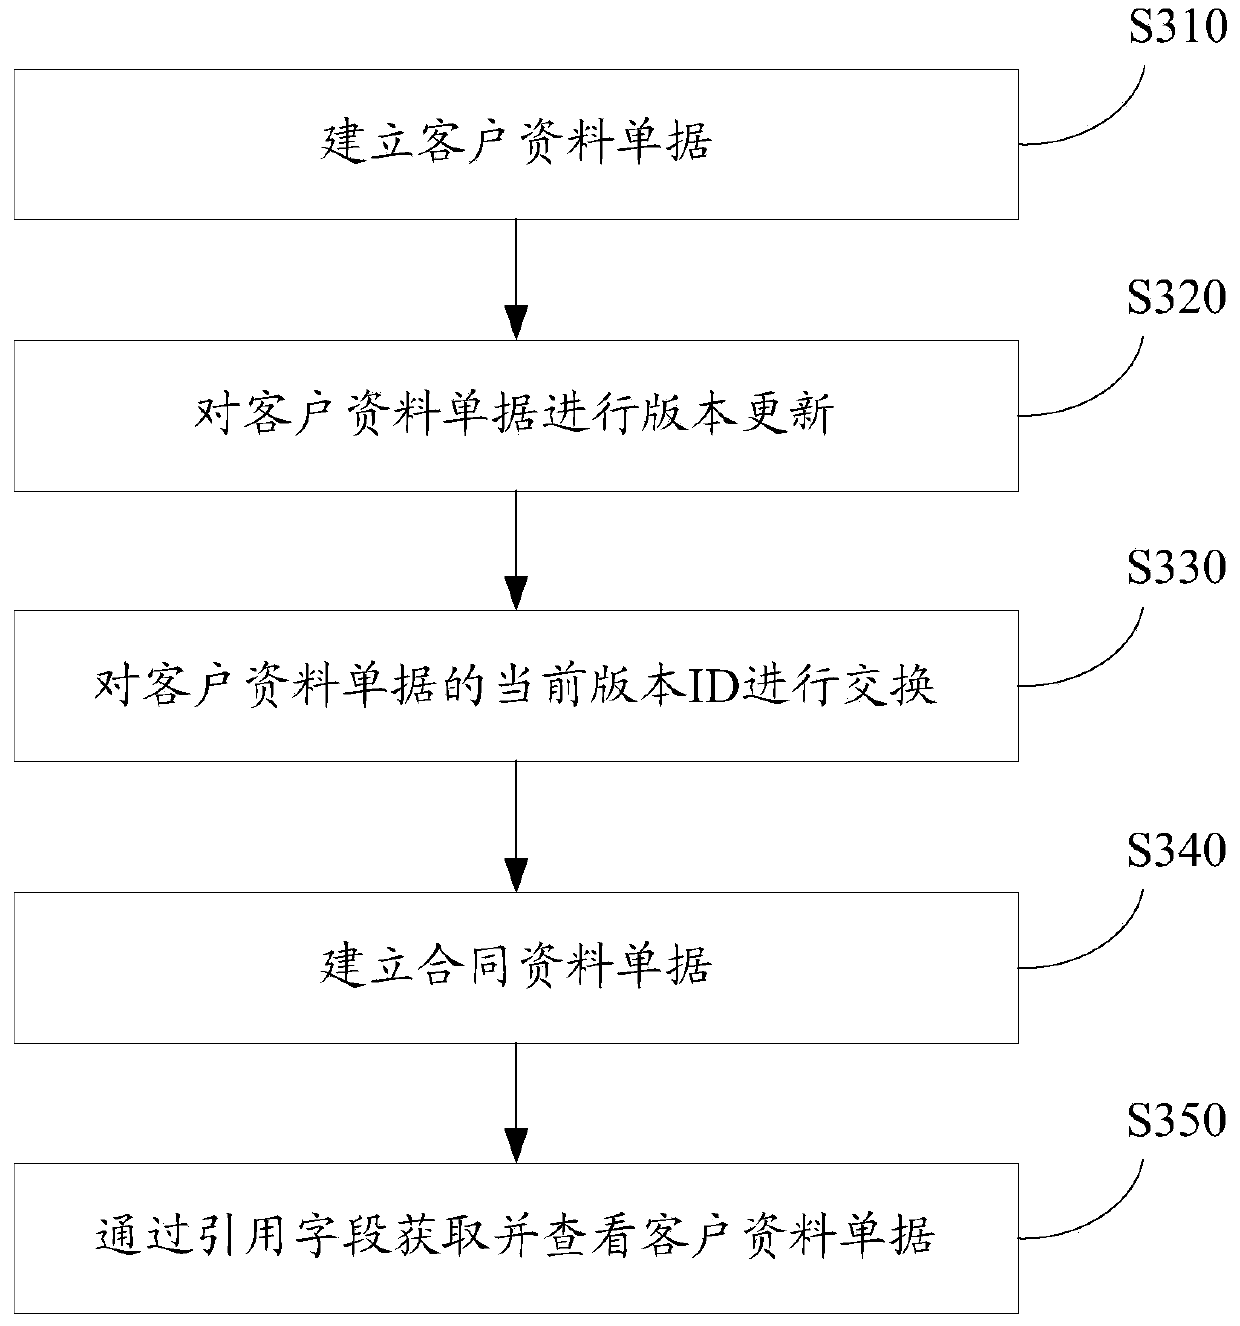 Version-ID-related (version-identity-related) data reference processing method and system